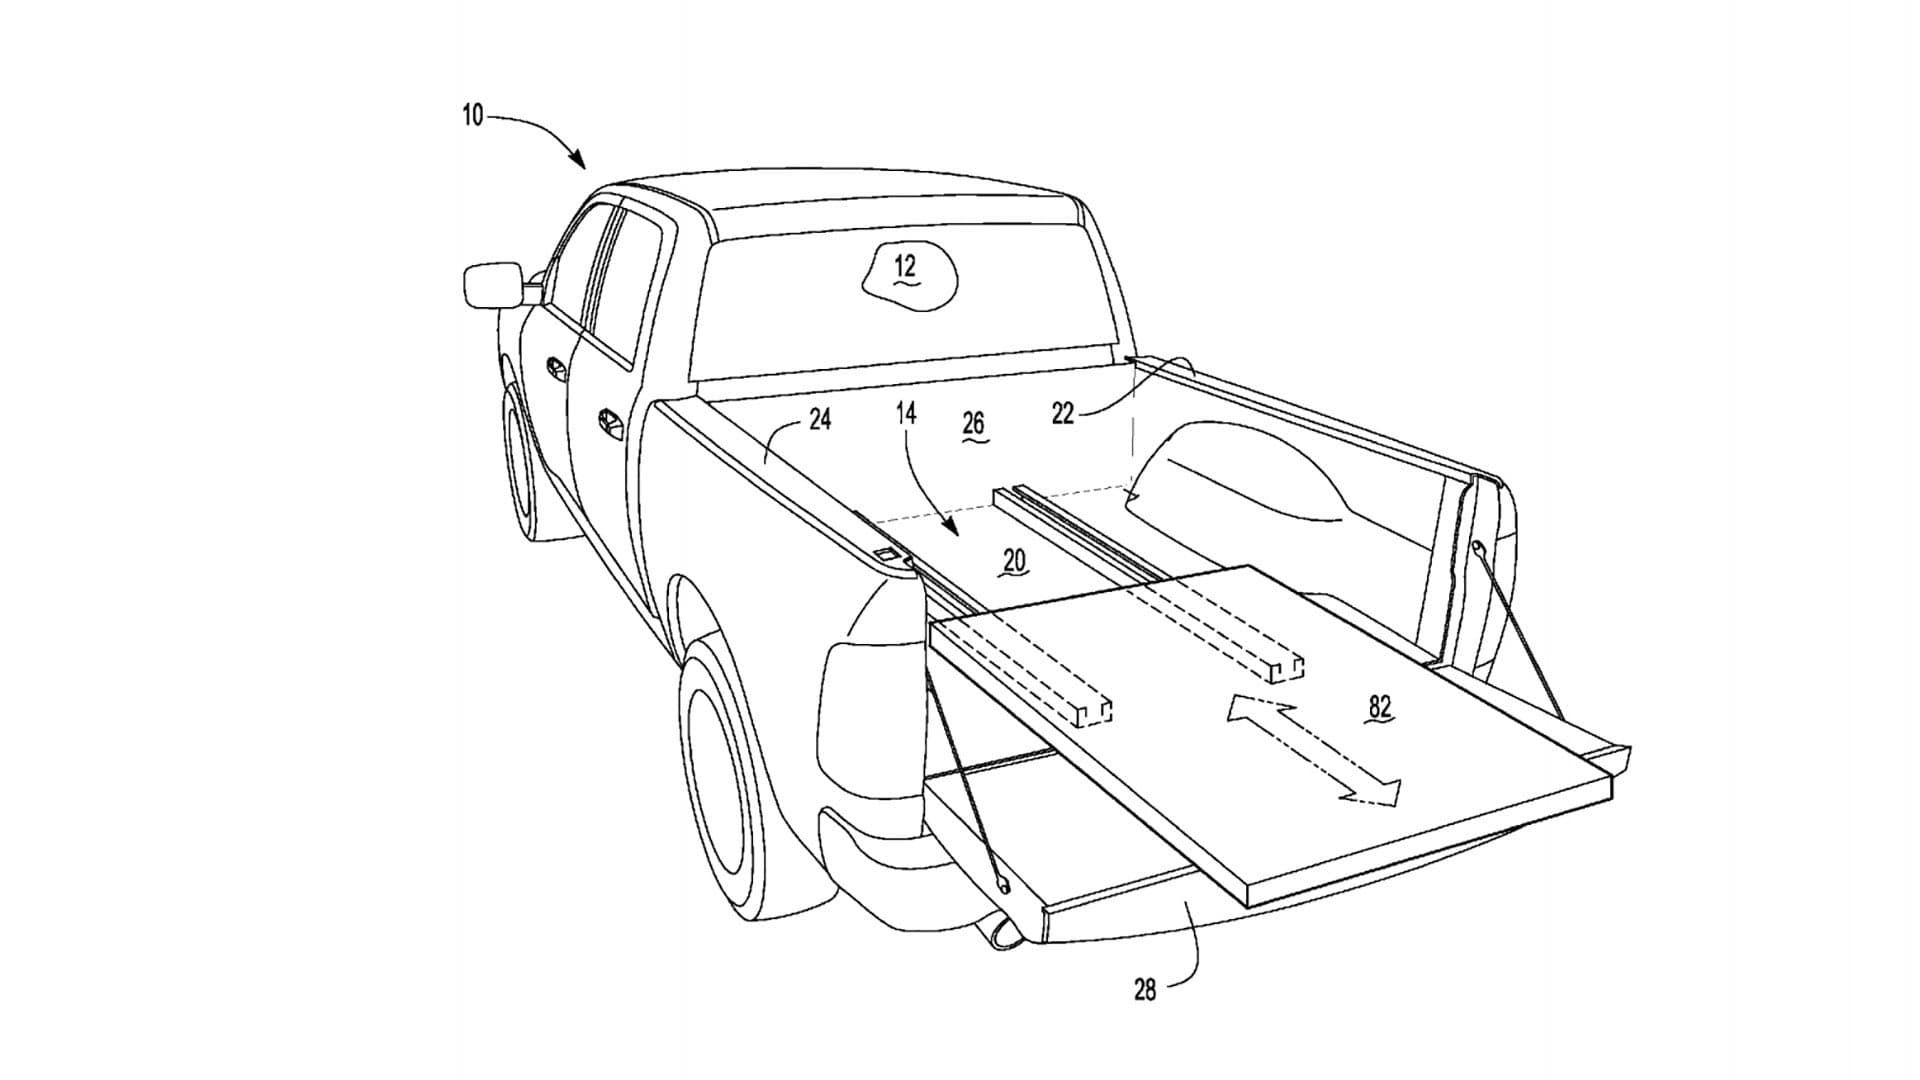 Ford’s Hybrid F-150 May Have a Powered Sliding Platform in the Bed